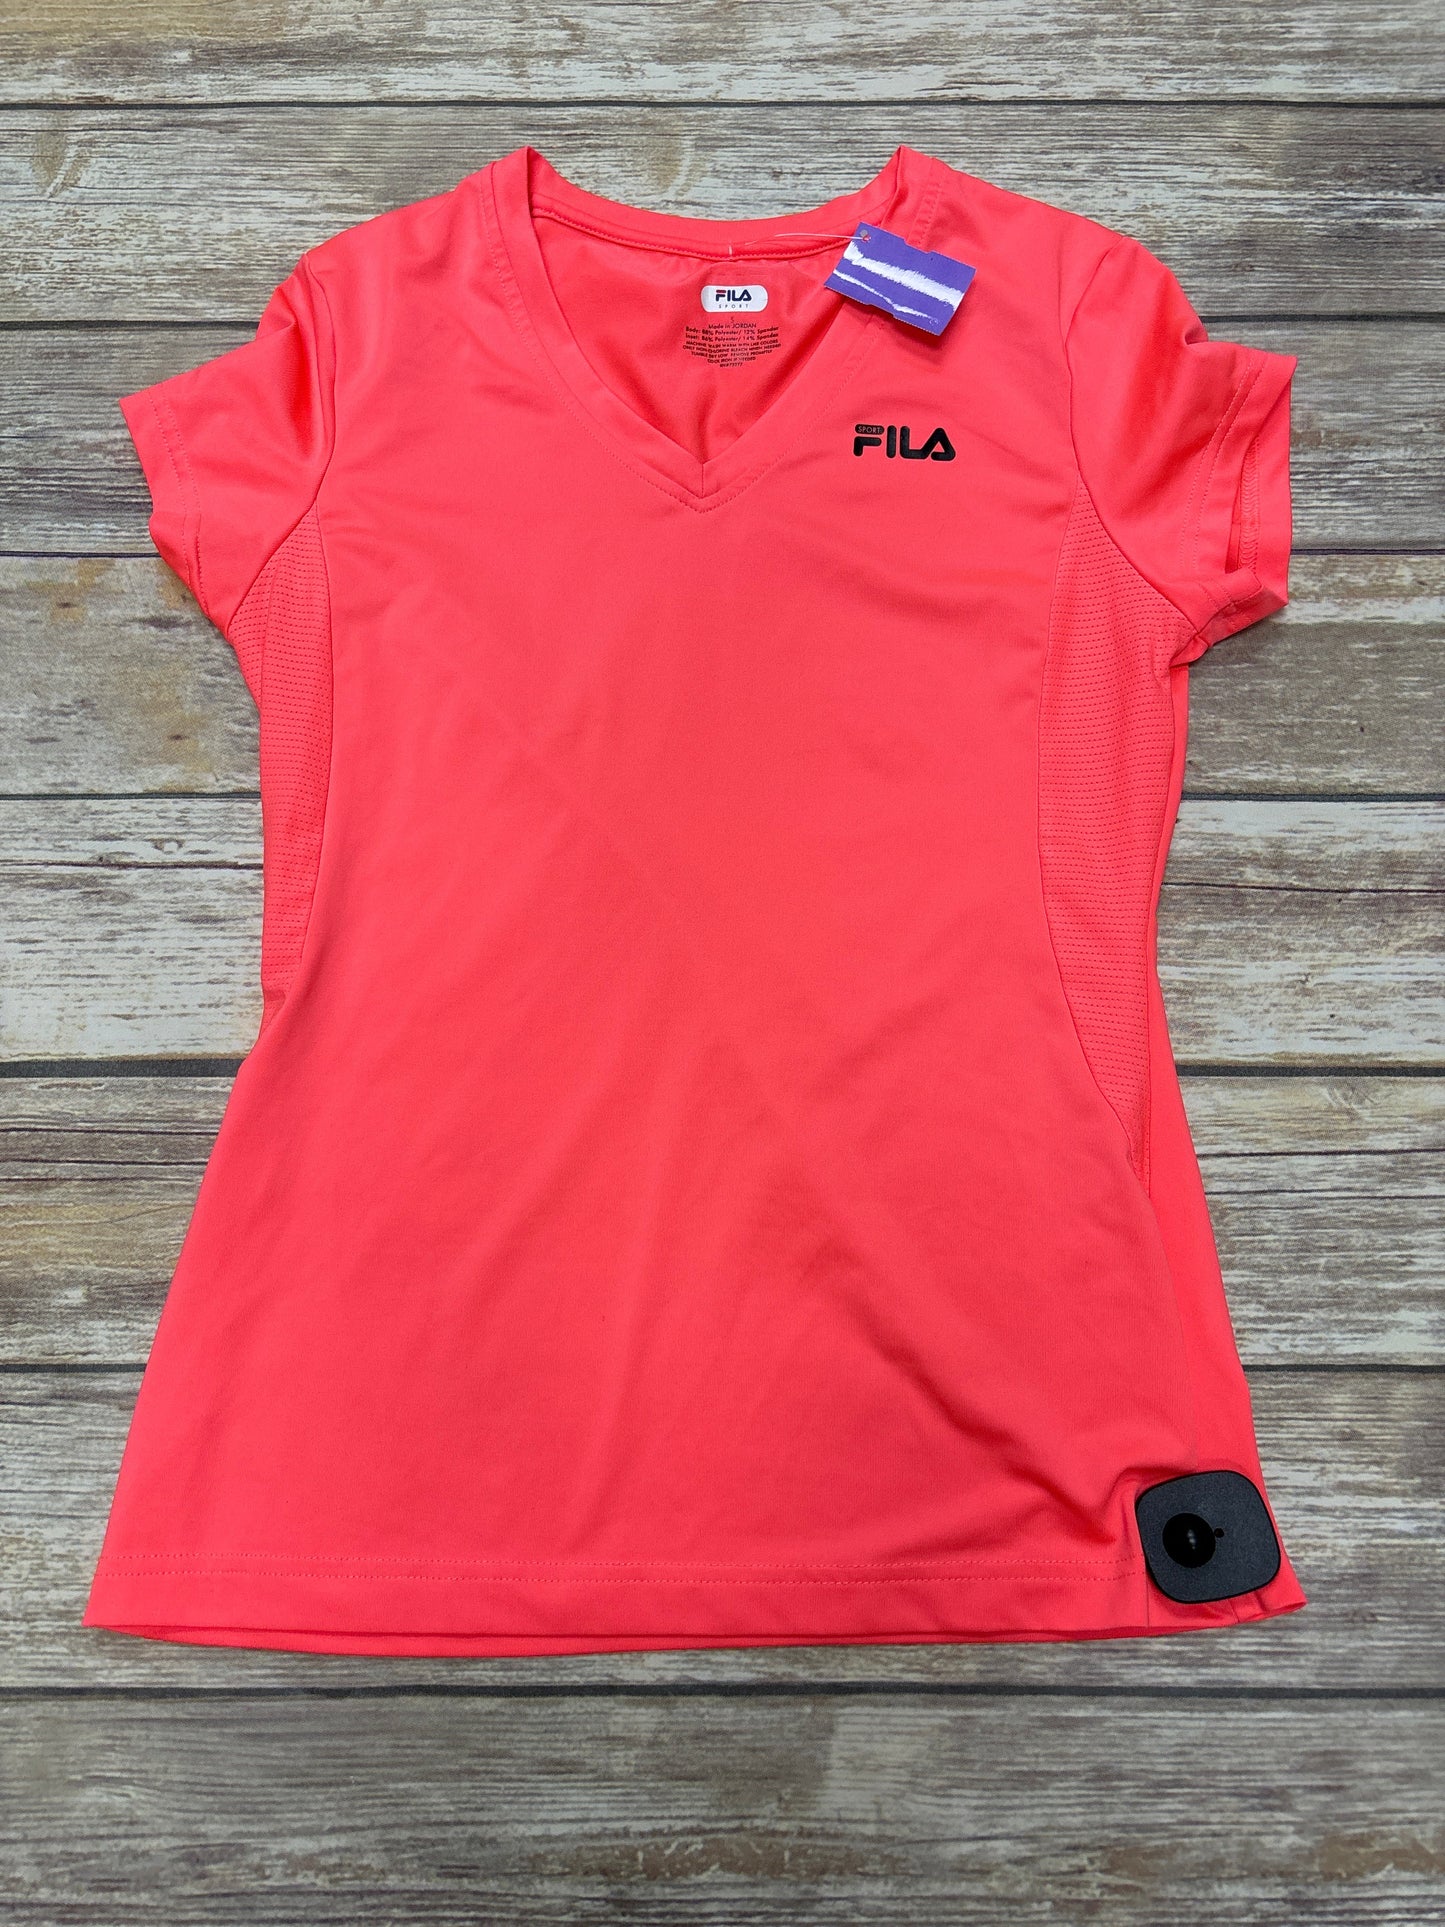 Coral Athletic Top Short Sleeve Fila, Size S